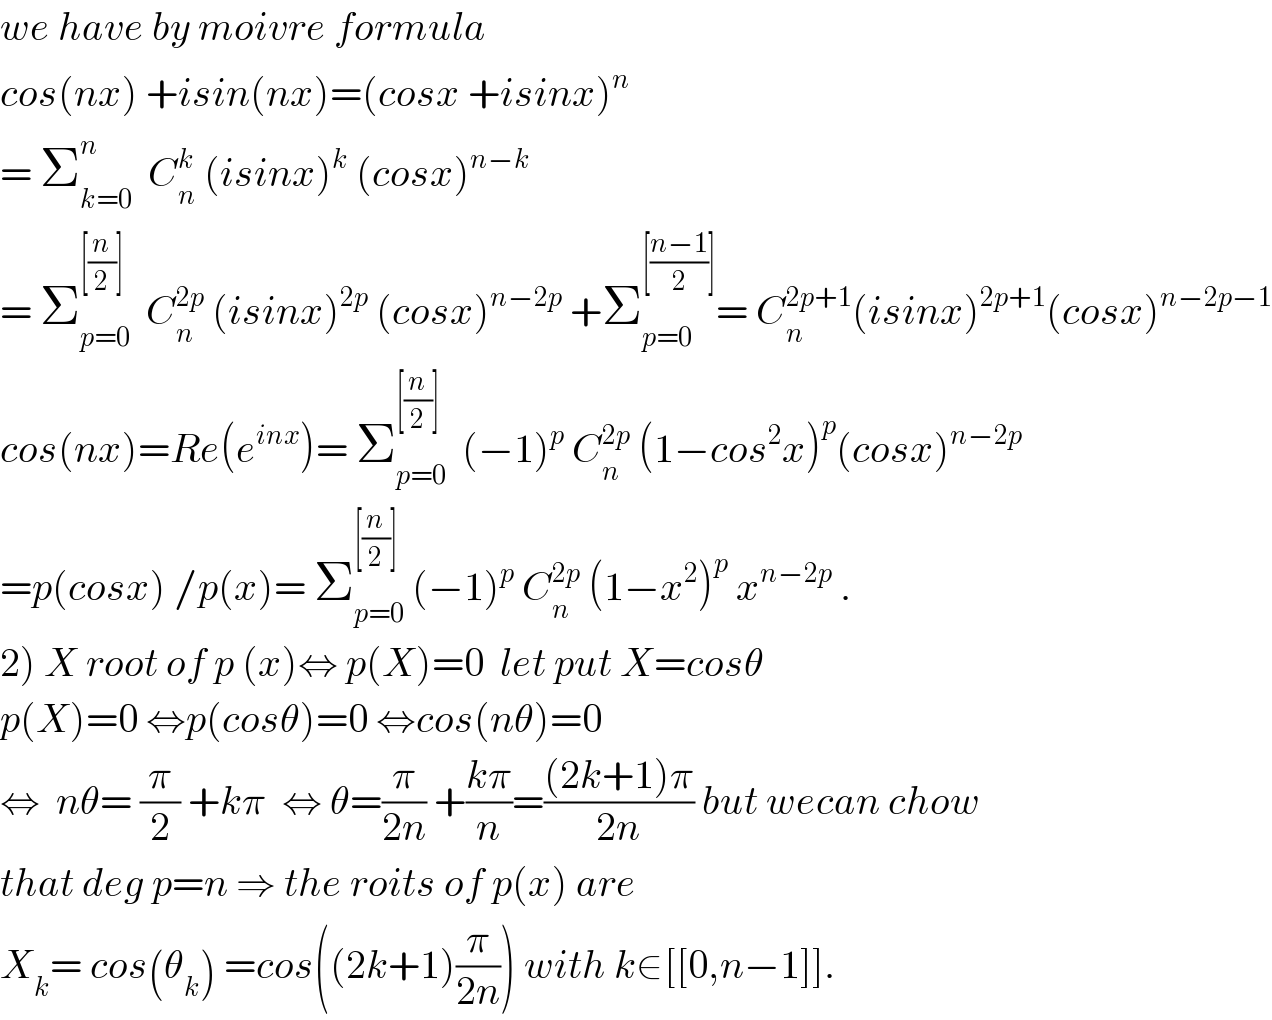 we have by moivre formula   cos(nx) +isin(nx)=(cosx +isinx)^n   = Σ_(k=0) ^n   C_n ^k  (isinx)^k  (cosx)^(n−k)   = Σ_(p=0) ^([(n/2)])   C_n ^(2p)  (isinx)^(2p)  (cosx)^(n−2p)  +Σ_(p=0) ^([((n−1)/2)]) = C_n ^(2p+1) (isinx)^(2p+1) (cosx)^(n−2p−1)   cos(nx)=Re(e^(inx) )= Σ_(p=0) ^([(n/2)])   (−1)^p  C_n ^(2p)  (1−cos^2 x)^p (cosx)^(n−2p)   =p(cosx) /p(x)= Σ_(p=0) ^([(n/2)])  (−1)^p  C_n ^(2p)  (1−x^2 )^p  x^(n−2p)  .  2) X root of p (x)⇔ p(X)=0  let put X=cosθ  p(X)=0 ⇔p(cosθ)=0 ⇔cos(nθ)=0  ⇔  nθ= (π/2) +kπ  ⇔ θ=(π/(2n)) +((kπ)/n)=(((2k+1)π)/(2n)) but wecan chow  that deg p=n ⇒ the roits of p(x) are  X_k = cos(θ_k ) =cos((2k+1)(π/(2n))) with k∈[[0,n−1]].  